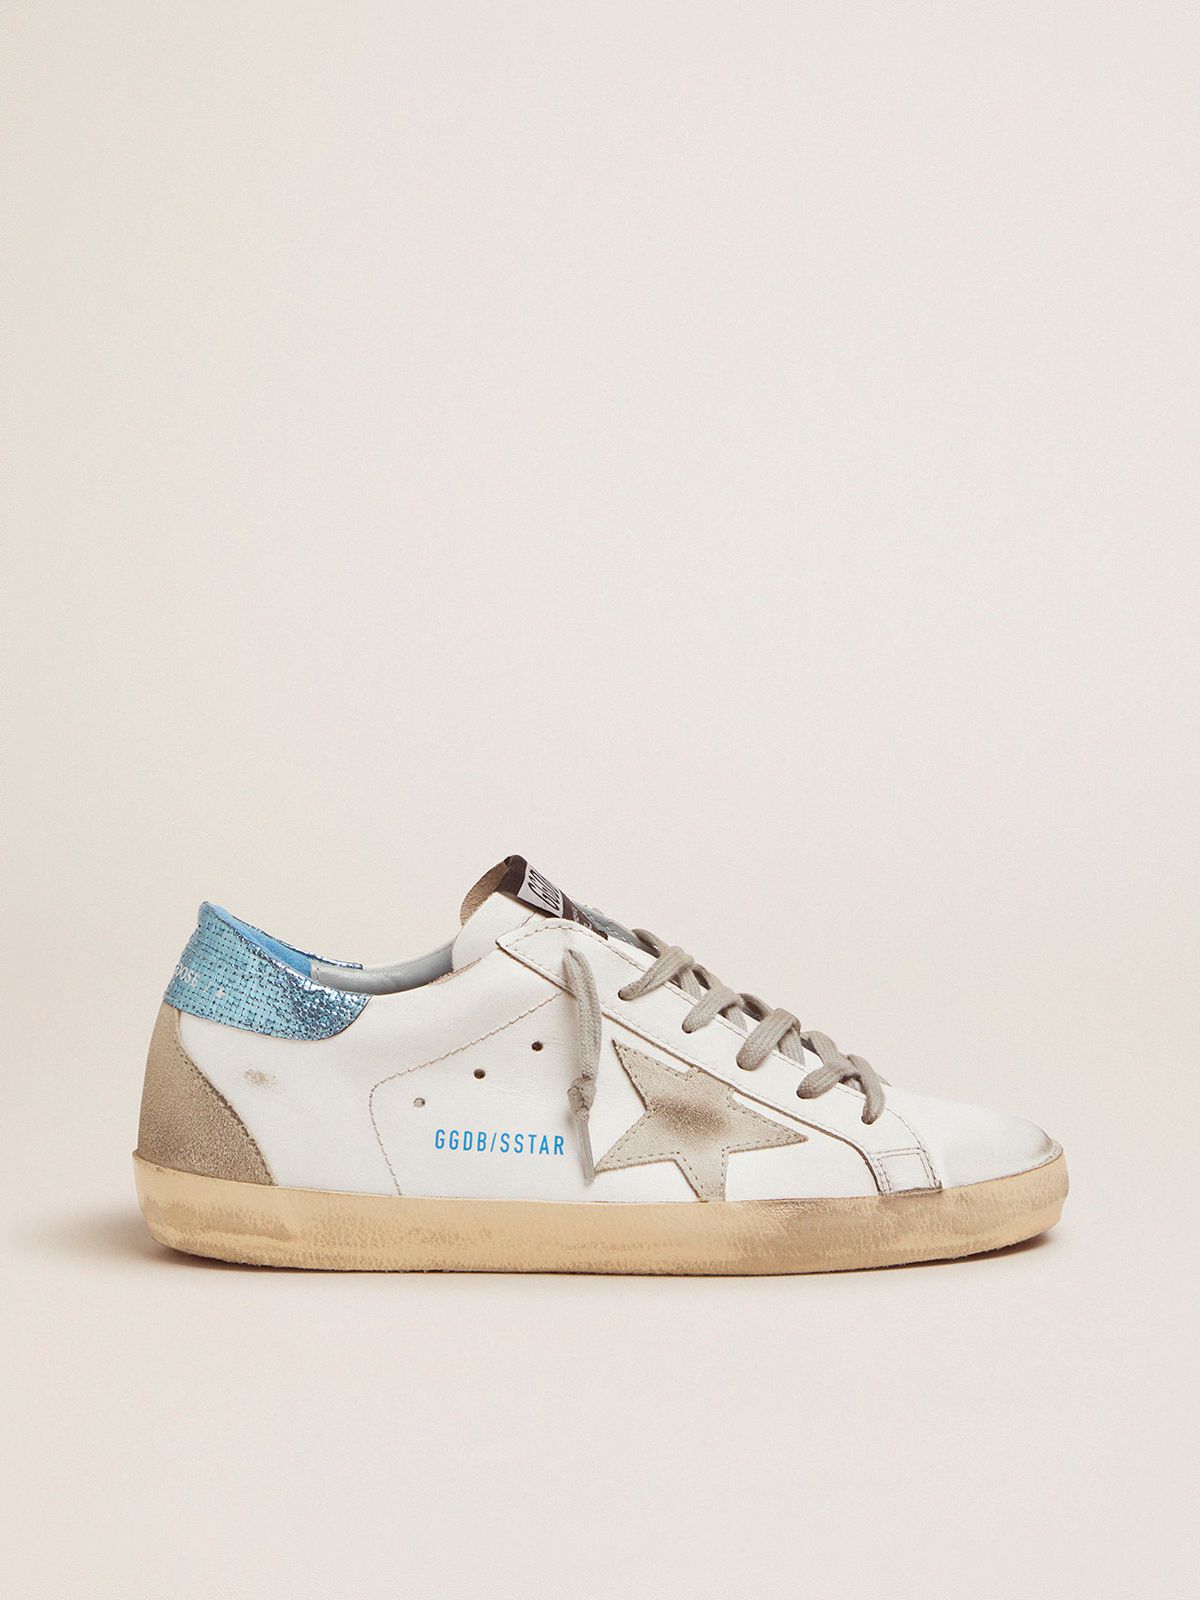 golden goose laminated White with Super-Star heel sneakers blue LTD tab